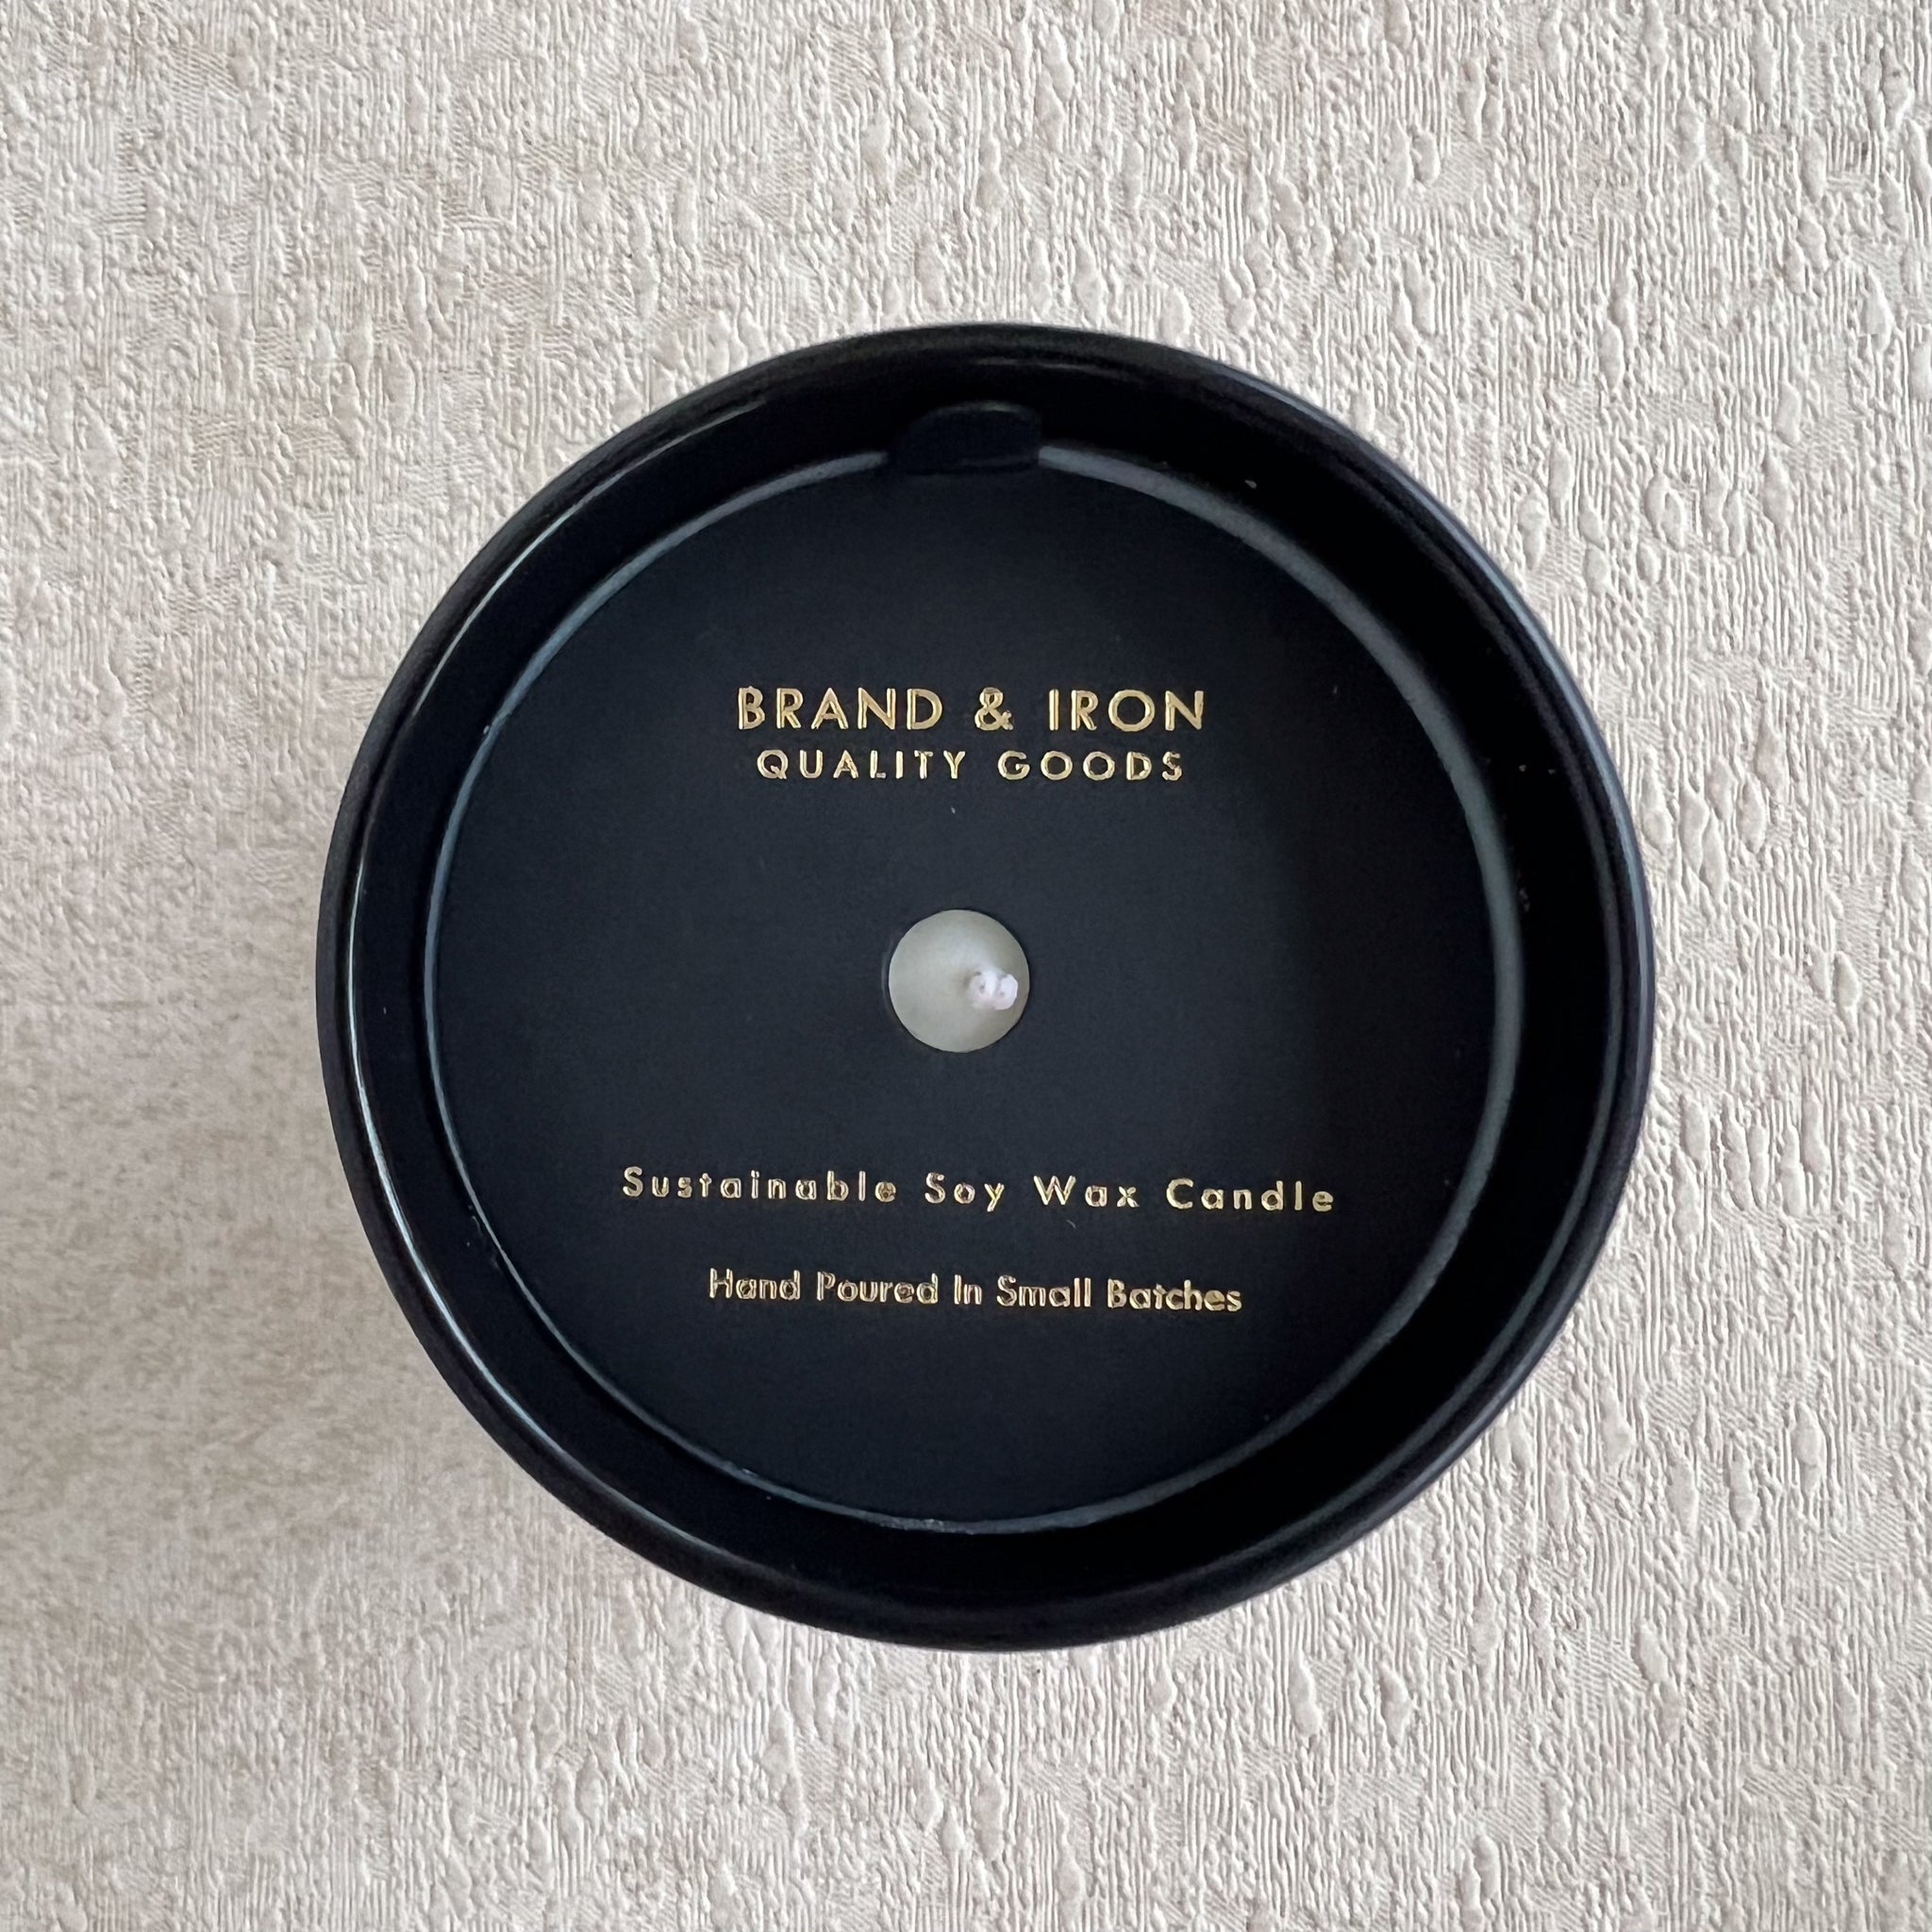 Brand &amp; Iron Soy Candle: Sweet Balsam